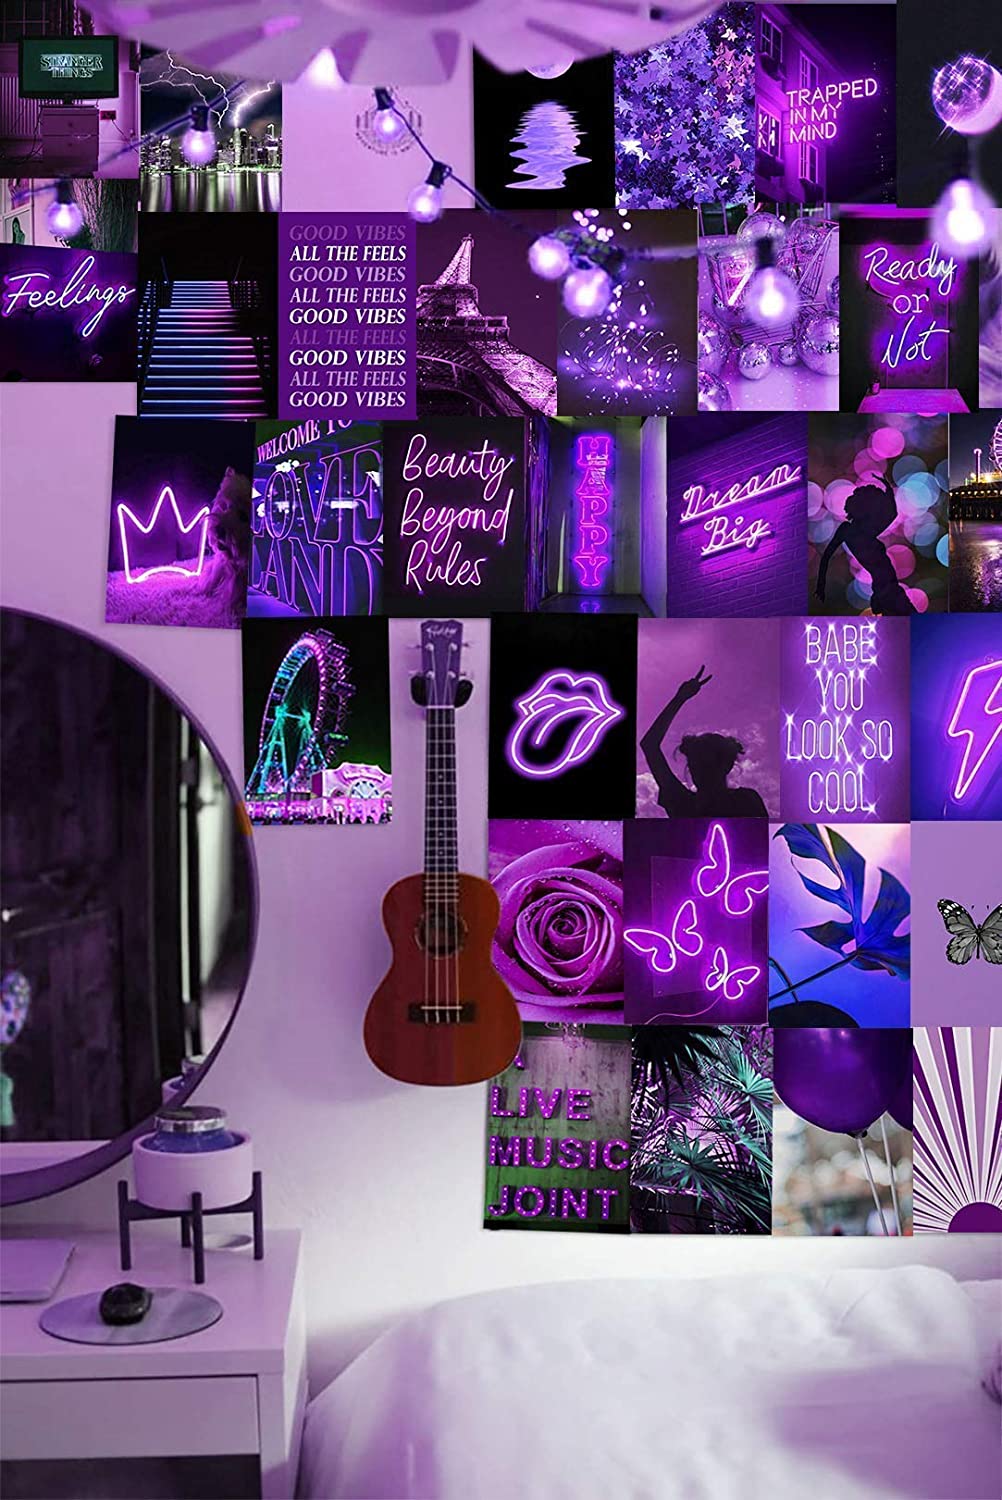 Purple Wall Collage Kit Aesthetic Picture, Bedroom Decor for Teen Girls, Wall Collage Kit, Collage Kit for Wall Aesthetic, VSCO Girls Bedroom Decor, Aesthetic Posters, Collage Kit (50 Set 4x6 inch)